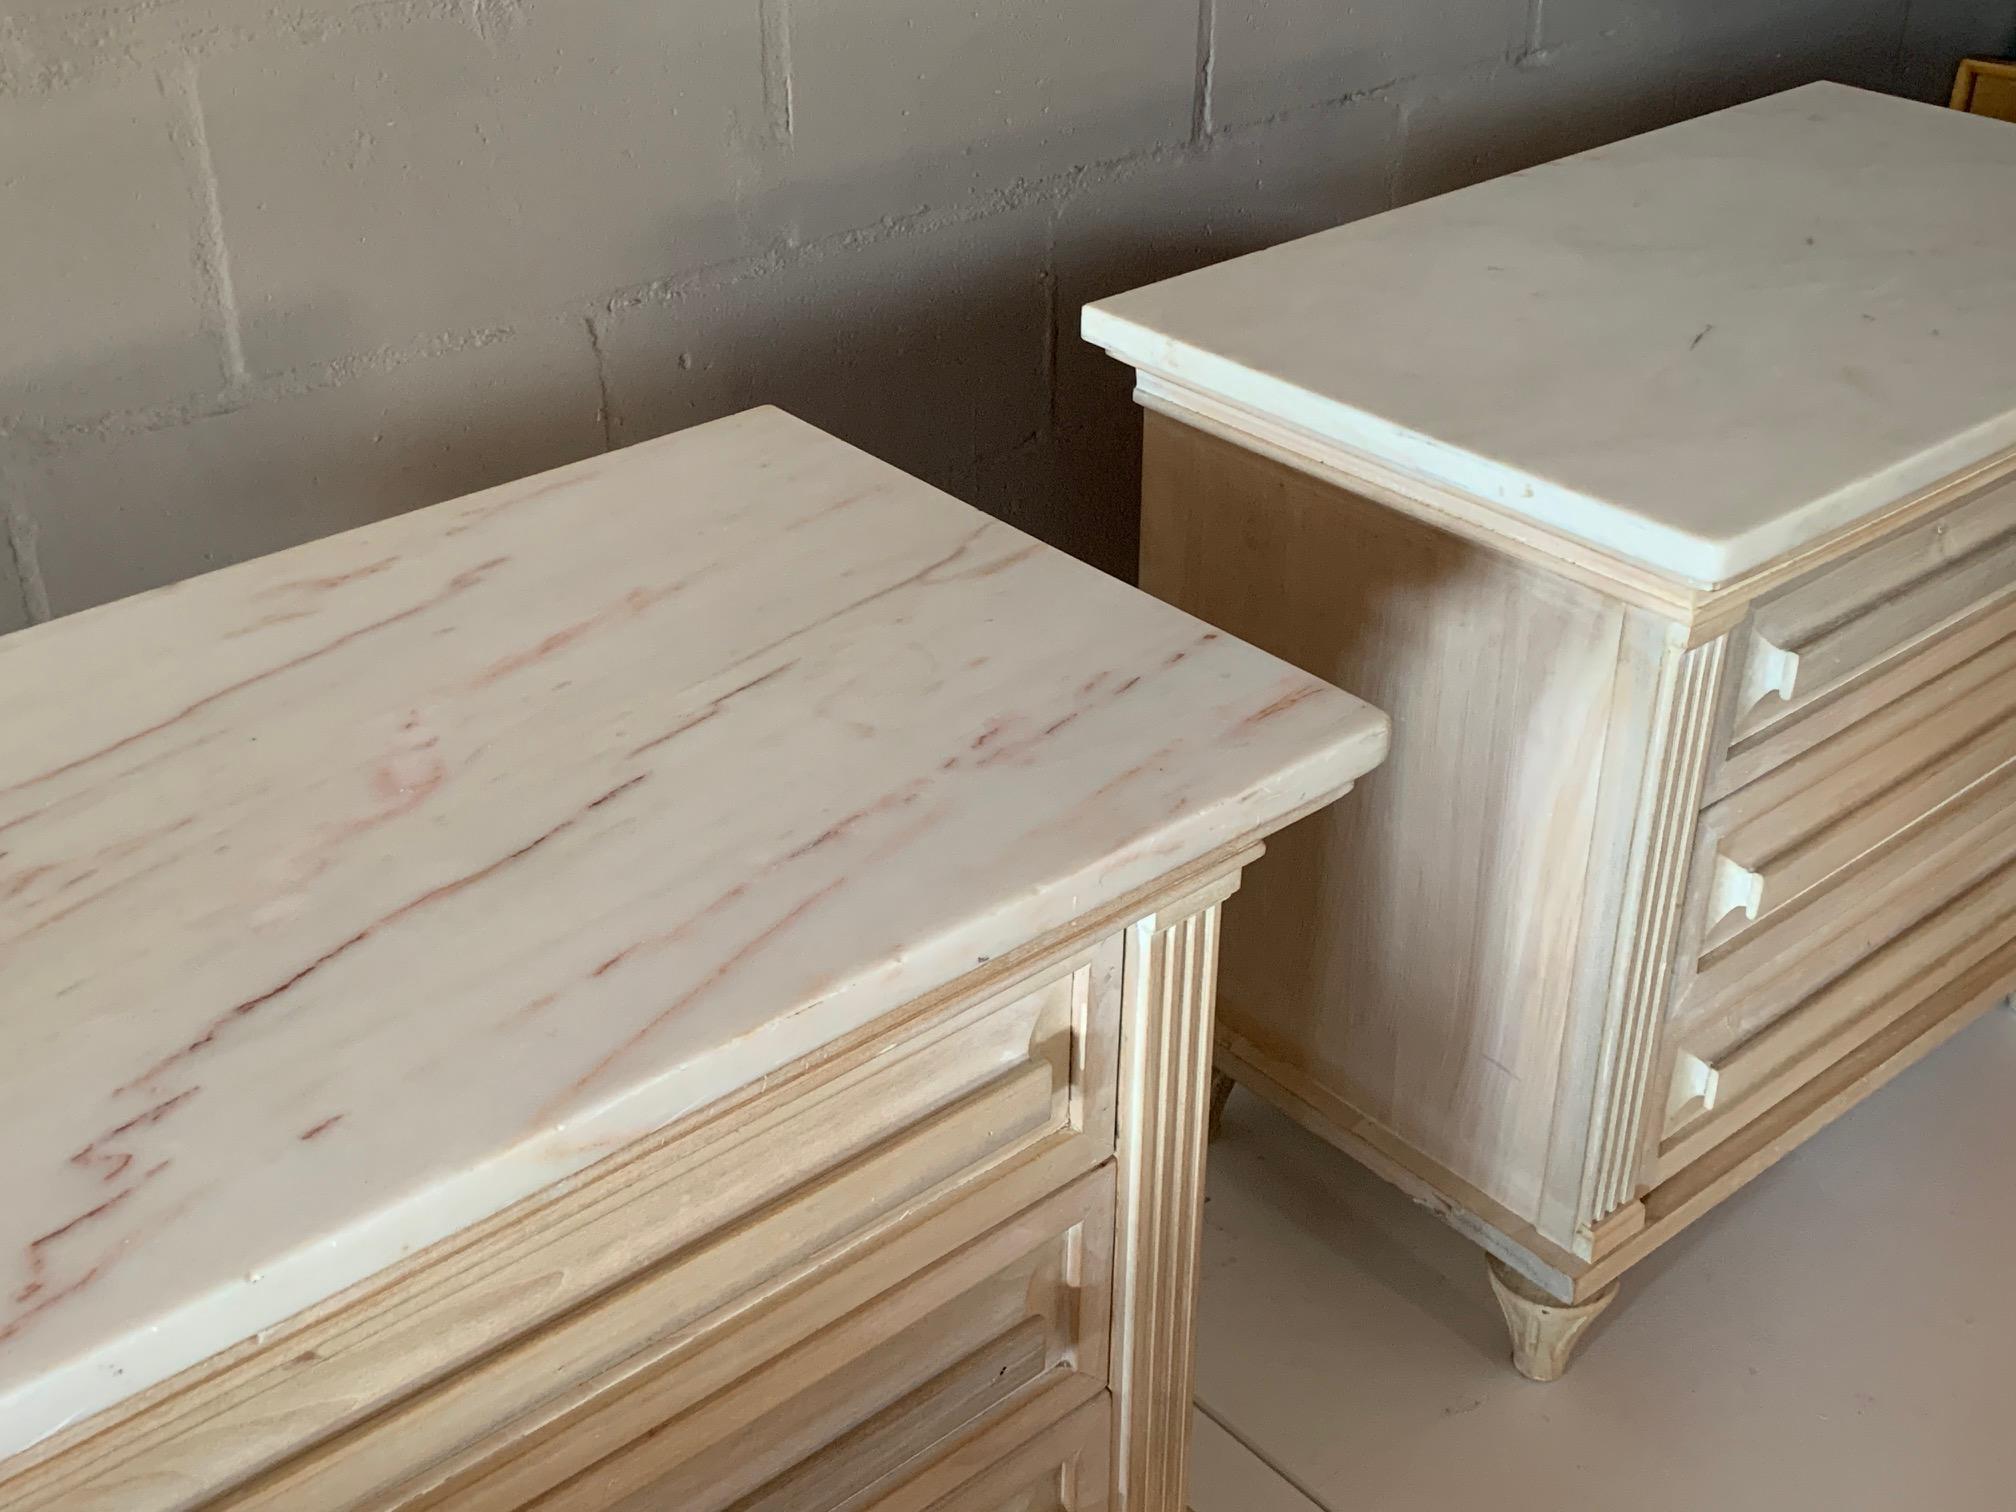 Mid-20th Century American of Martinsville Nightstands in White Wash Finish and Marble Tops